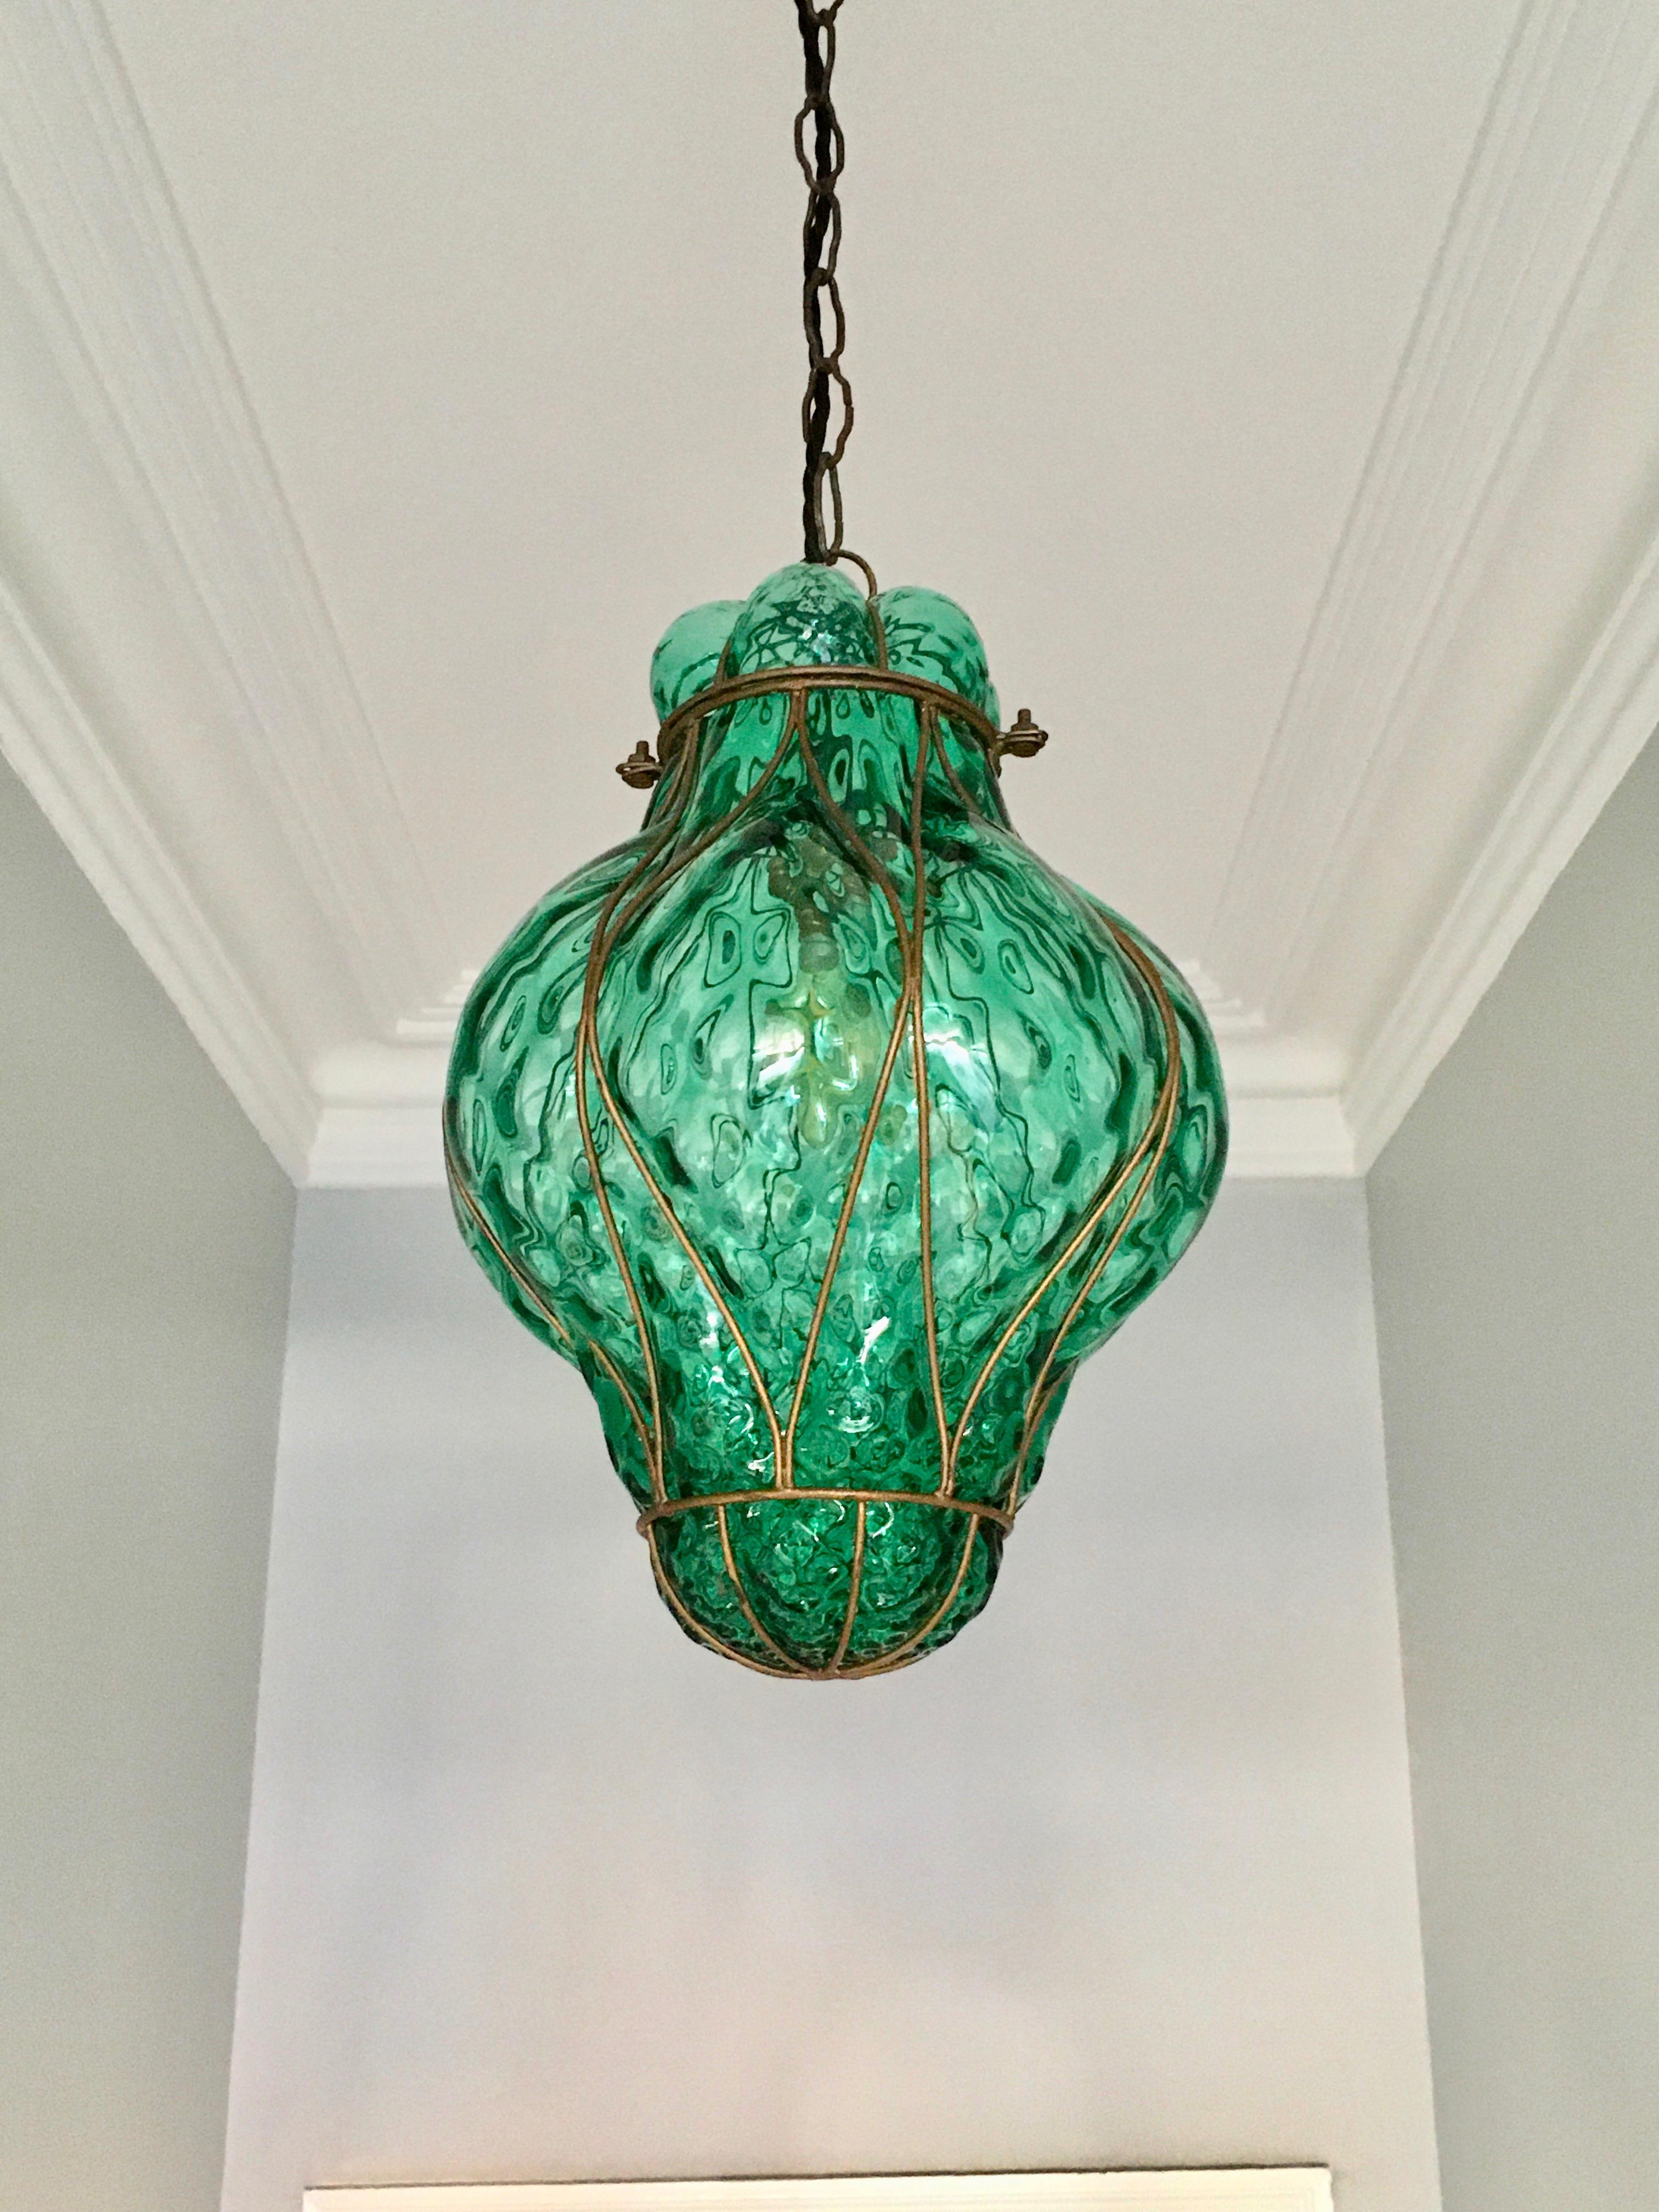 A lovely light for hallways and entrances, this hand-blown glass lantern is attributed to Seguso. The glass is a beautiful sea green, the colour of the Venetian Laguna. As always, these lovely lanterns create their own magic and show amazing